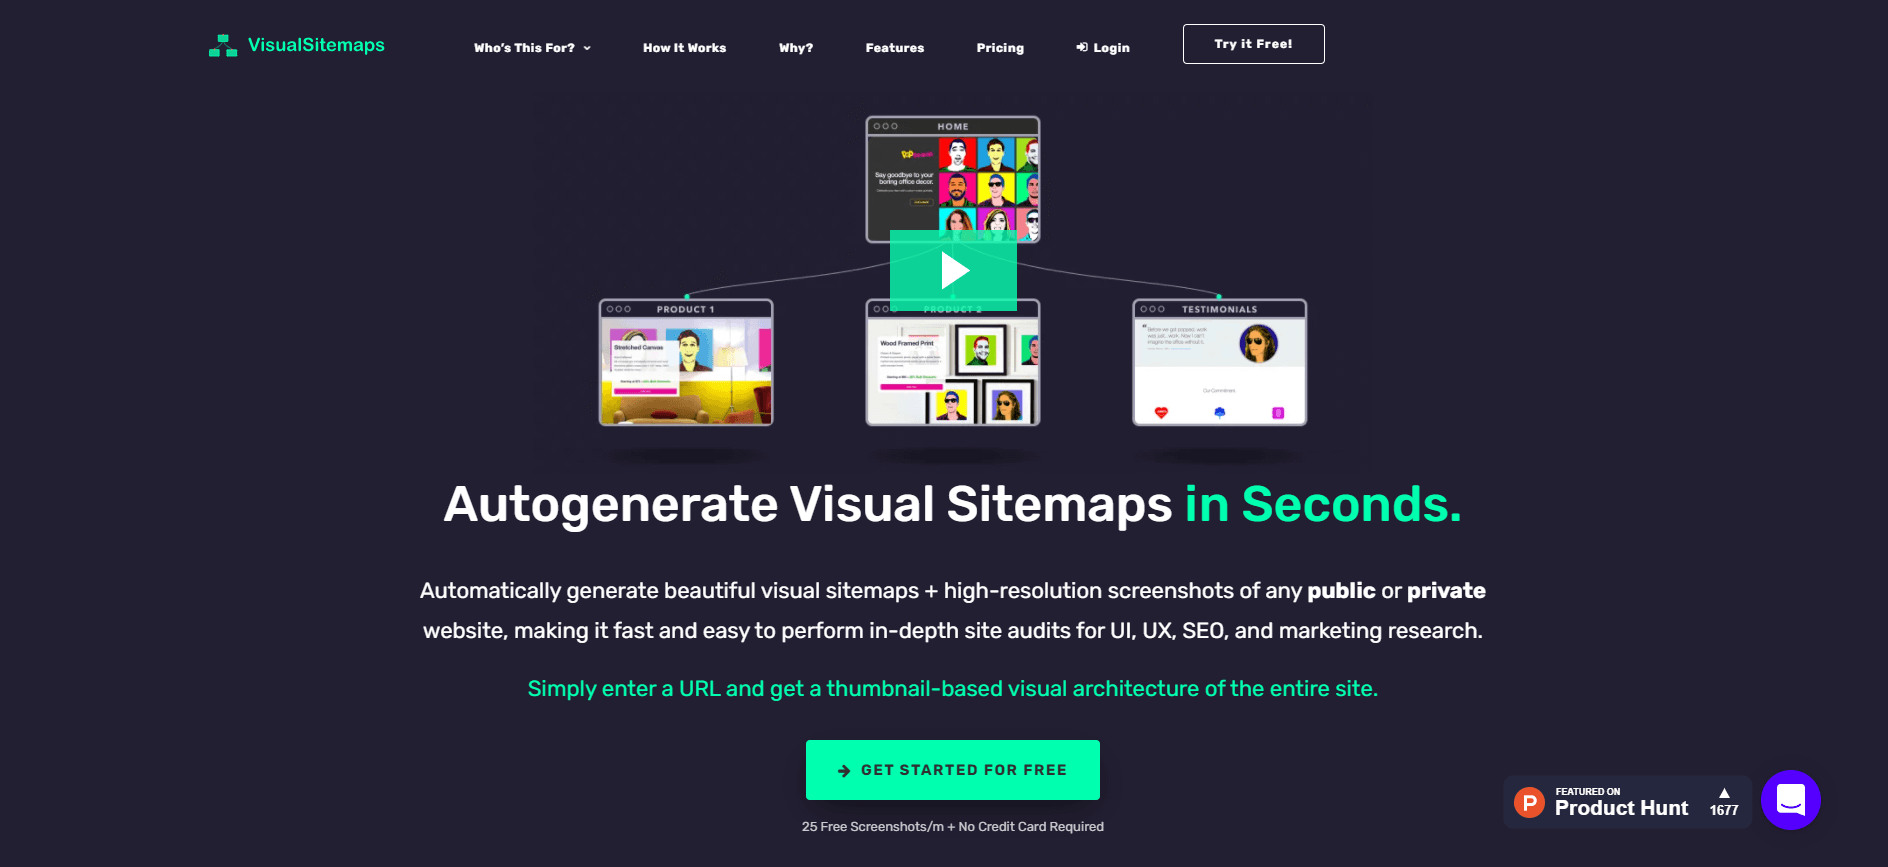 VisualSitemaps is a sitemap builder that takes screenshots of any target website